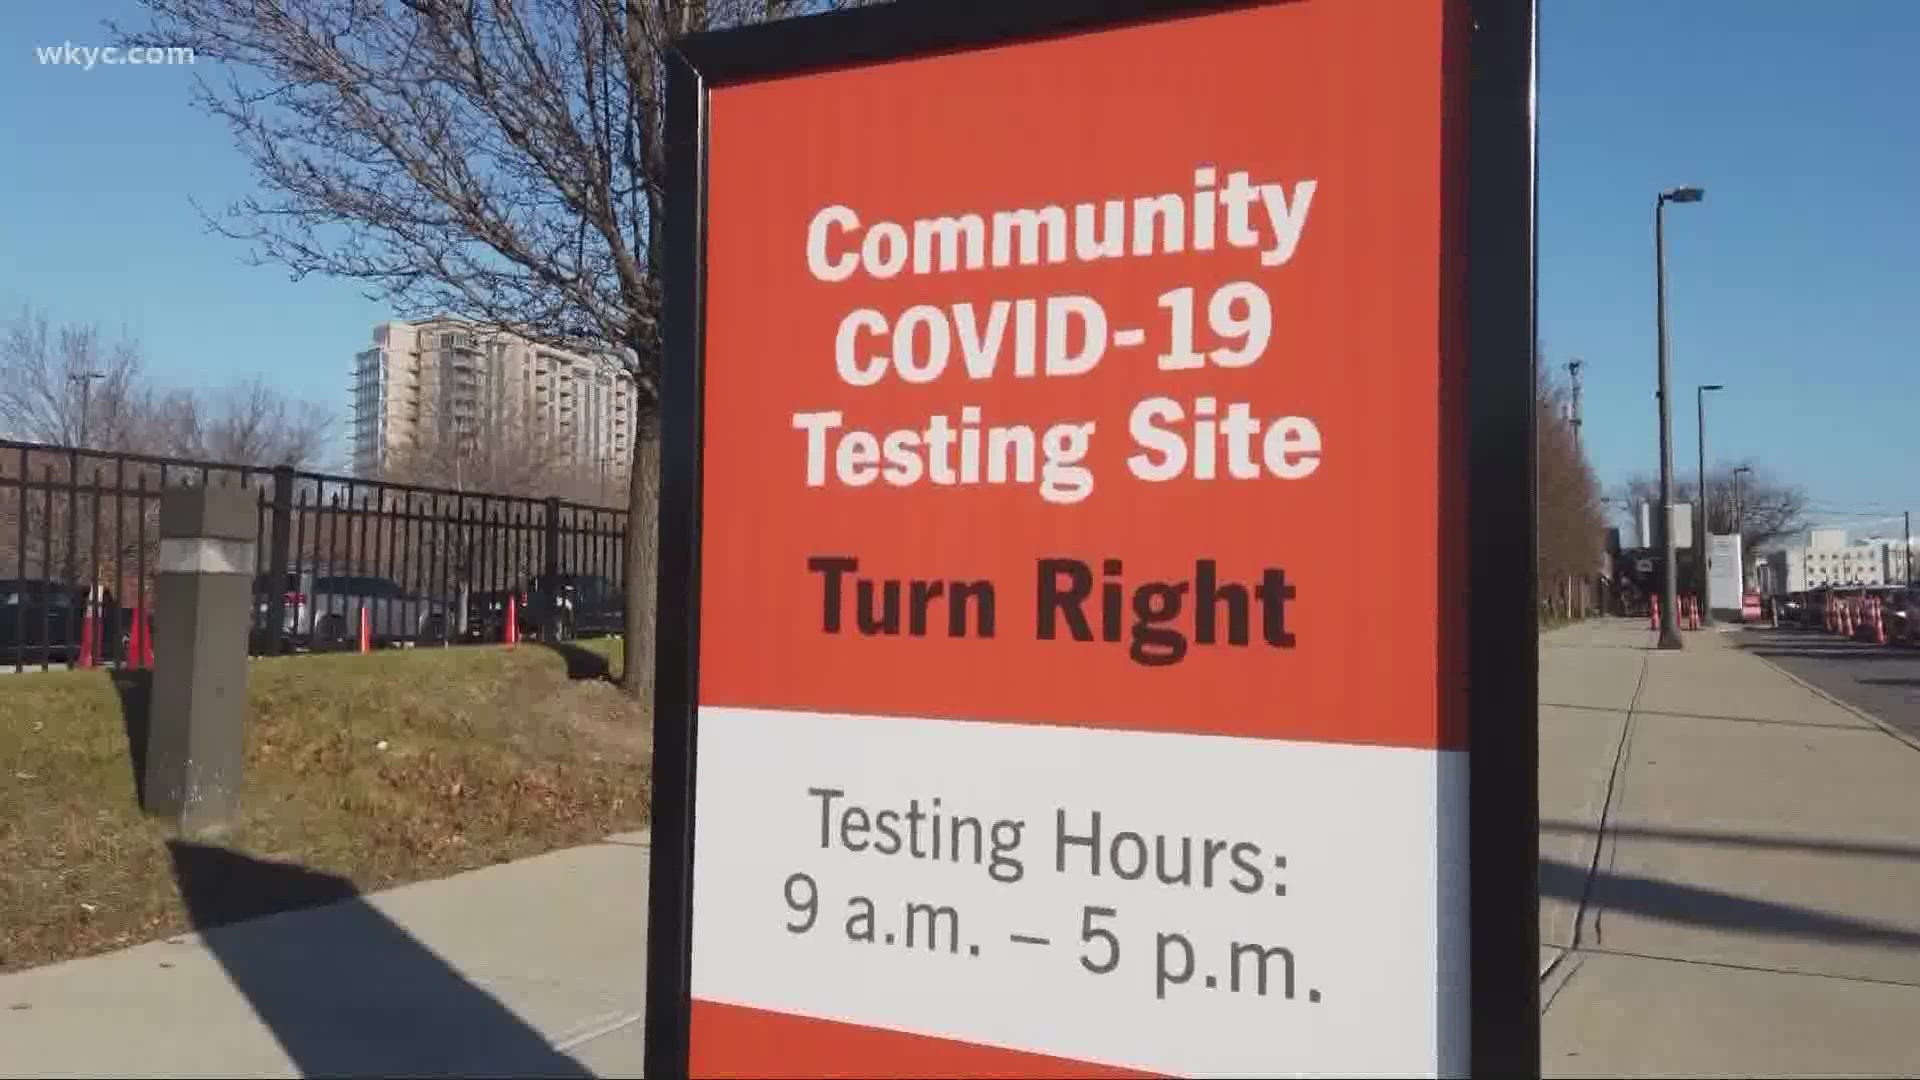 More than 1,000 people were tested on Tuesday, but the high demand forced the line to be cut off after three hours.